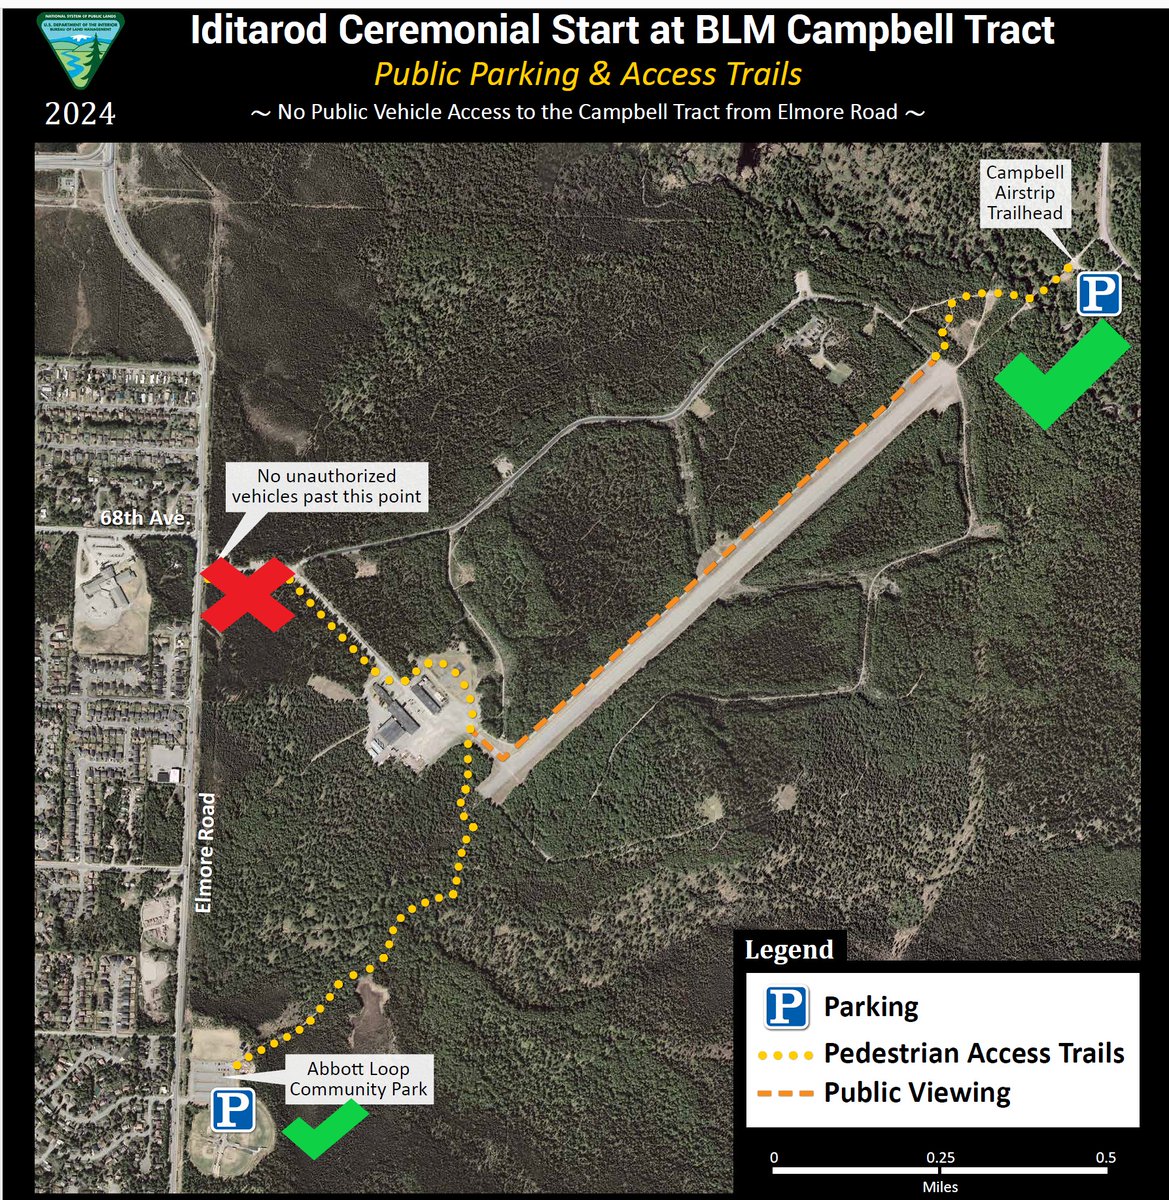 Today's the day. The ceremonial start for the Iditarod will conclude at Campbell Tract after starting in downtown Anchorage at 10 AM. Parking information below! #Idiatrod2024 #Anchorage #Alaska photo by BLM.